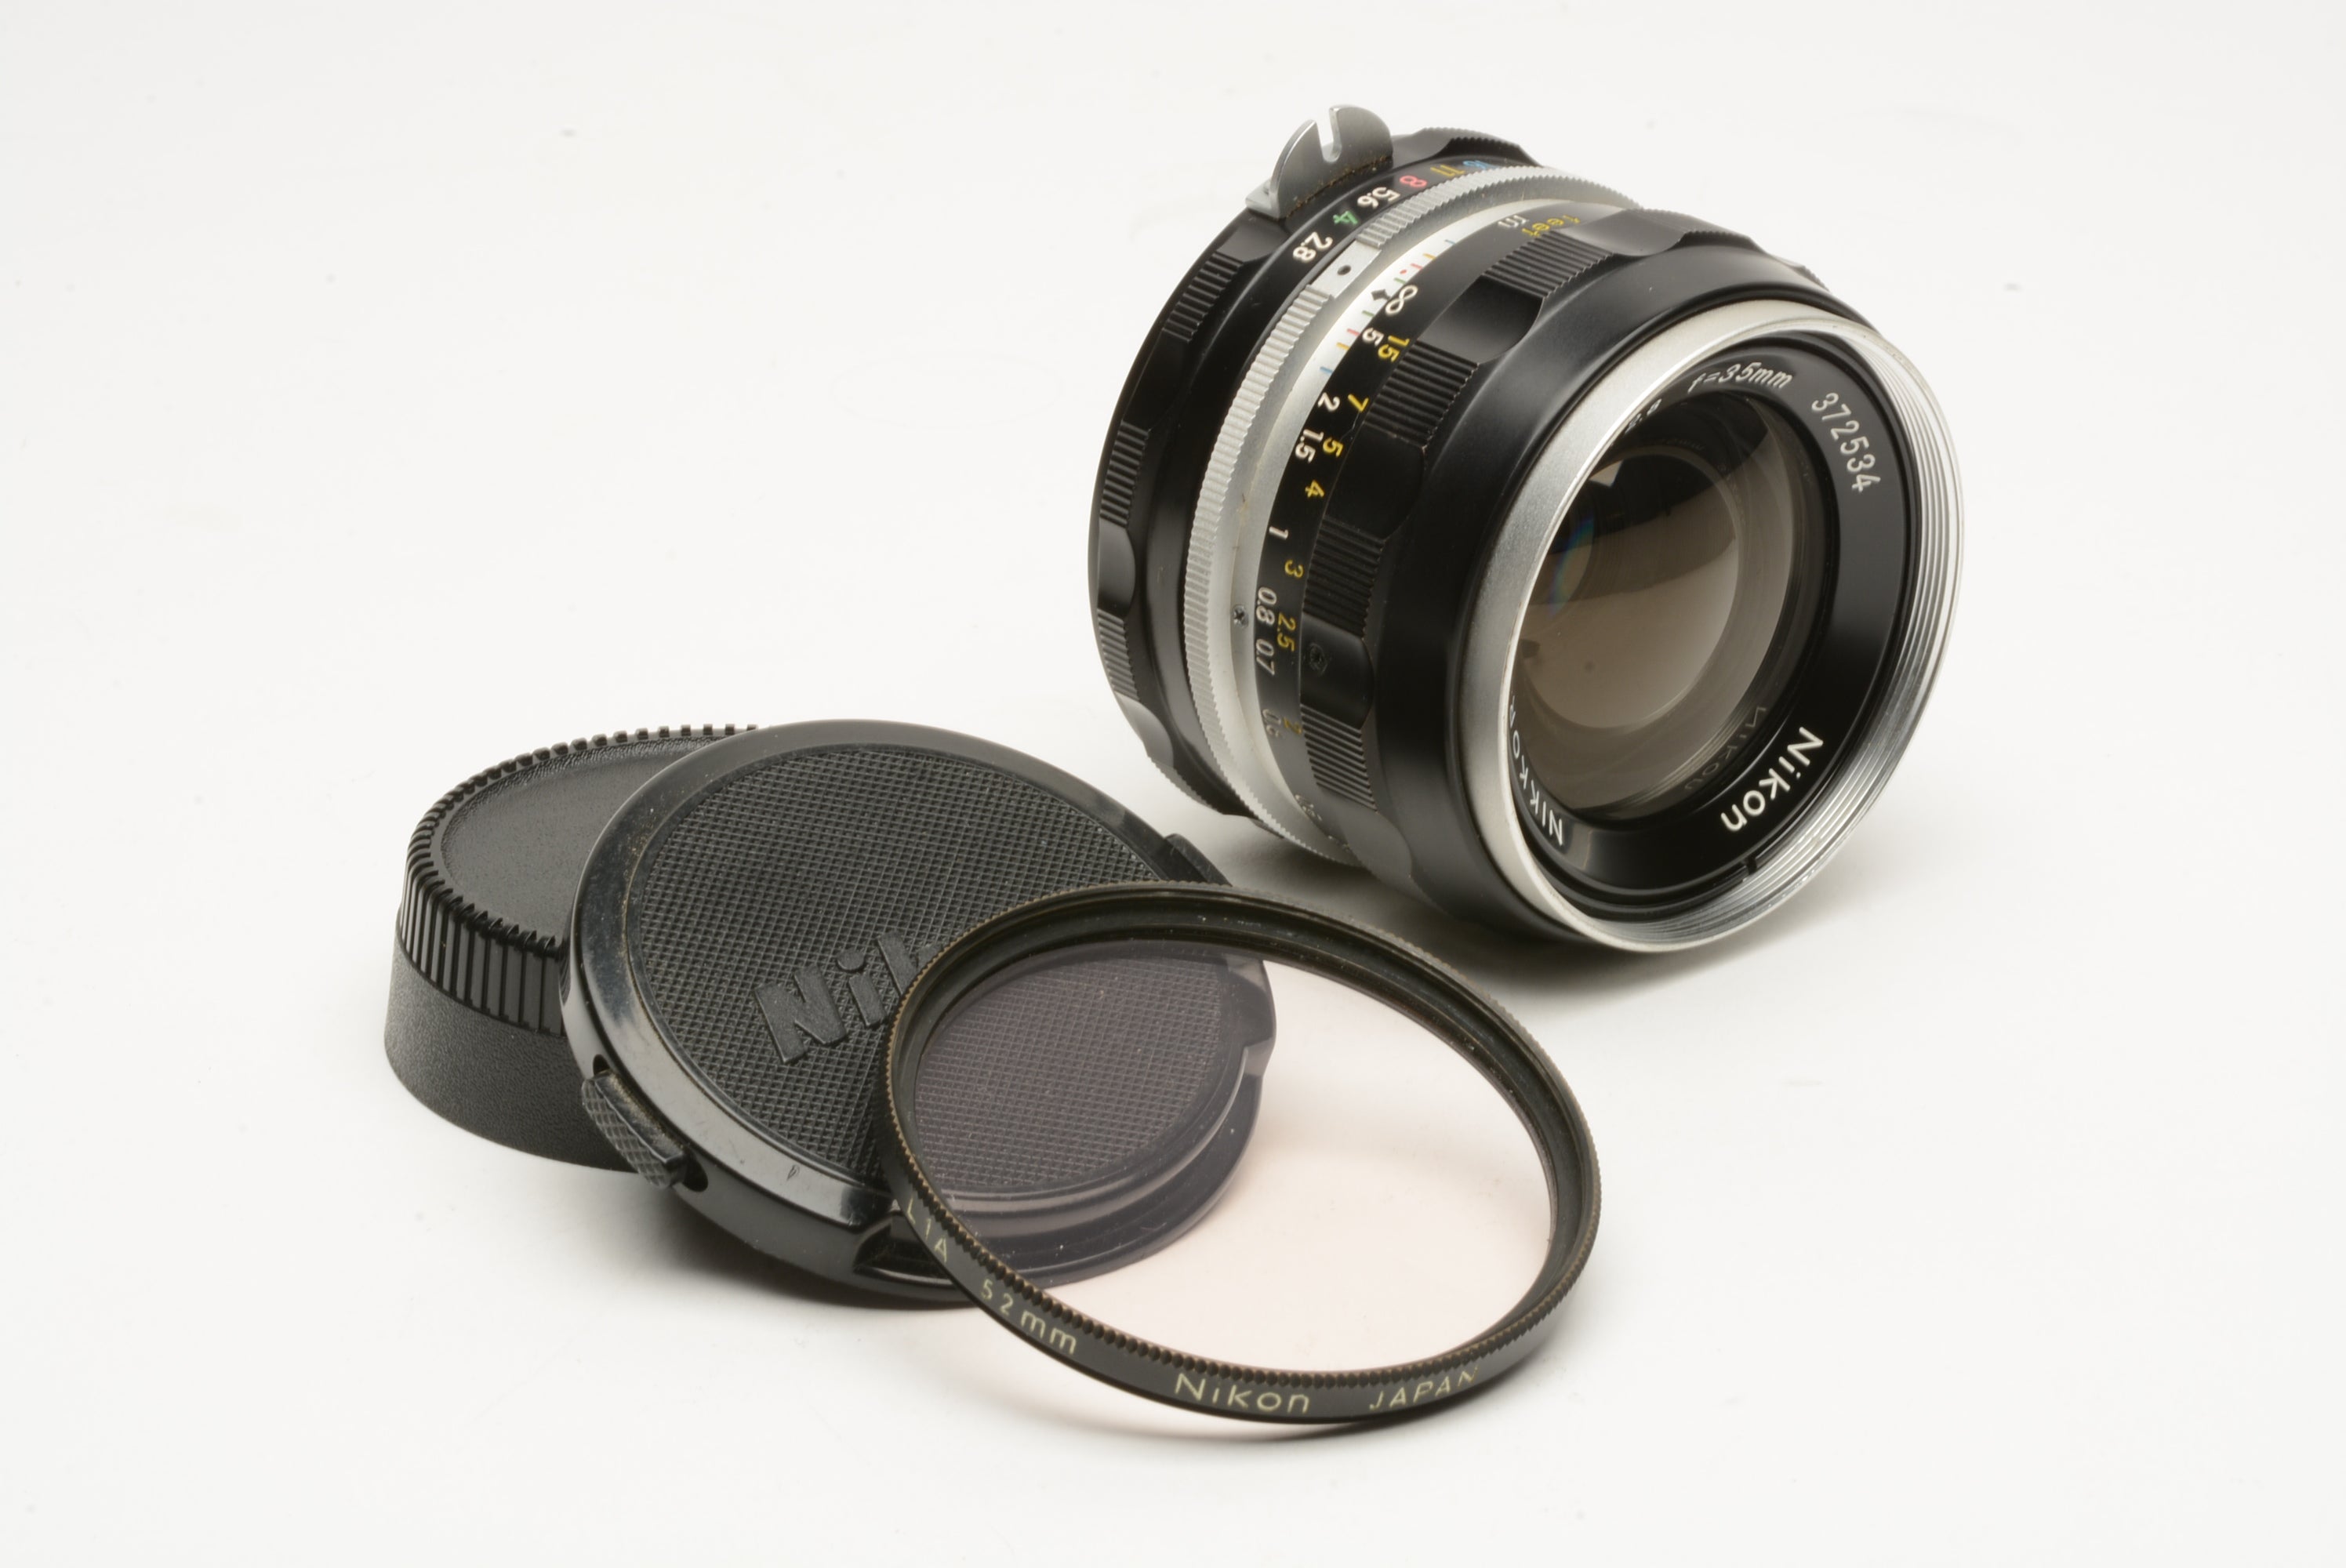 Nikon Nikkor 35mm f2.8 Non-AI wide angle lens – RecycledPhoto